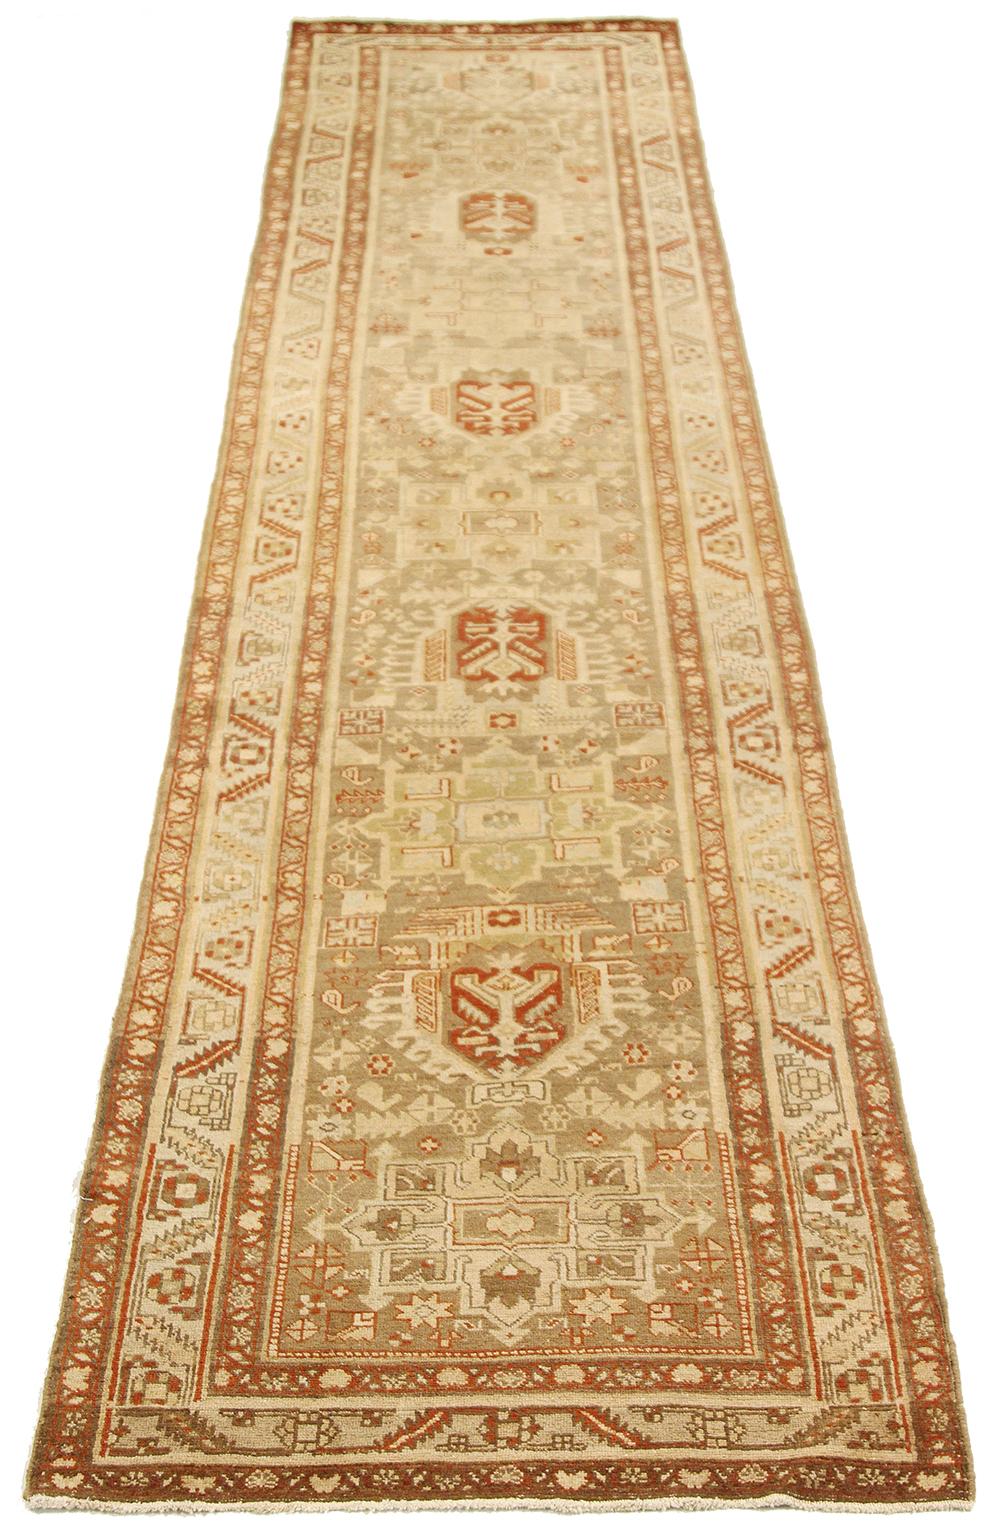 Antique Persian runner rug handwoven from the finest sheep’s wool and colored with all-natural vegetable dyes that are safe for humans and pets. It’s a traditional Heriz design featuring a lovely field covered with ivory and red tribal details. It’s